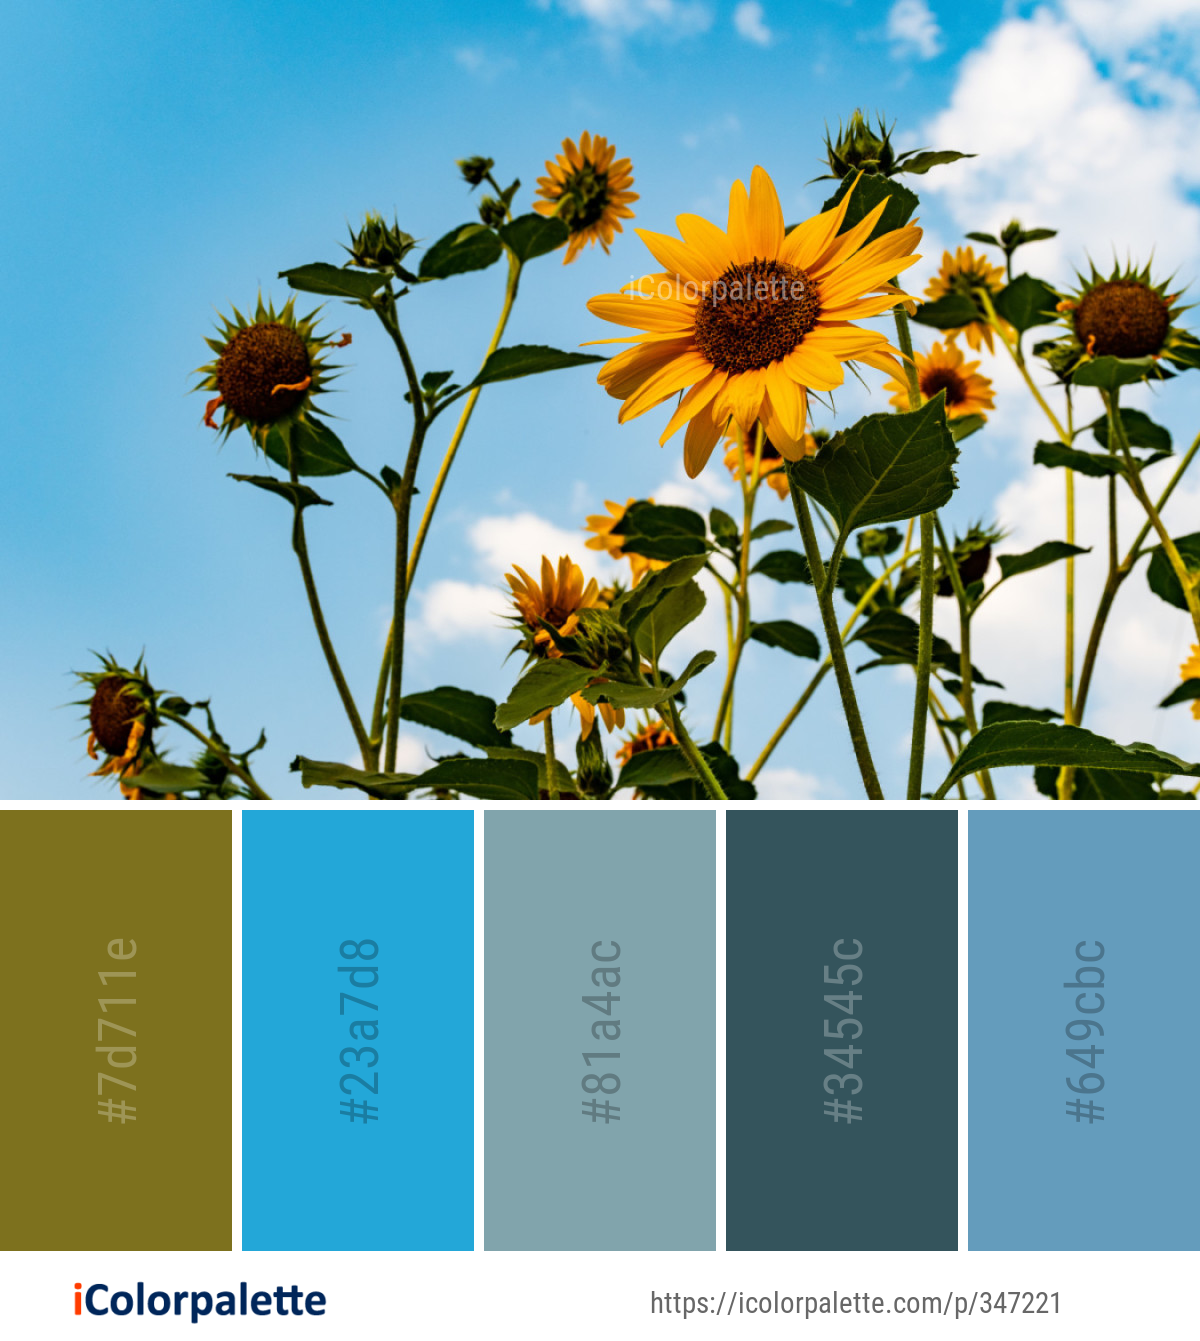 Color Palette Ideas from Flower Plant Sunflower Image